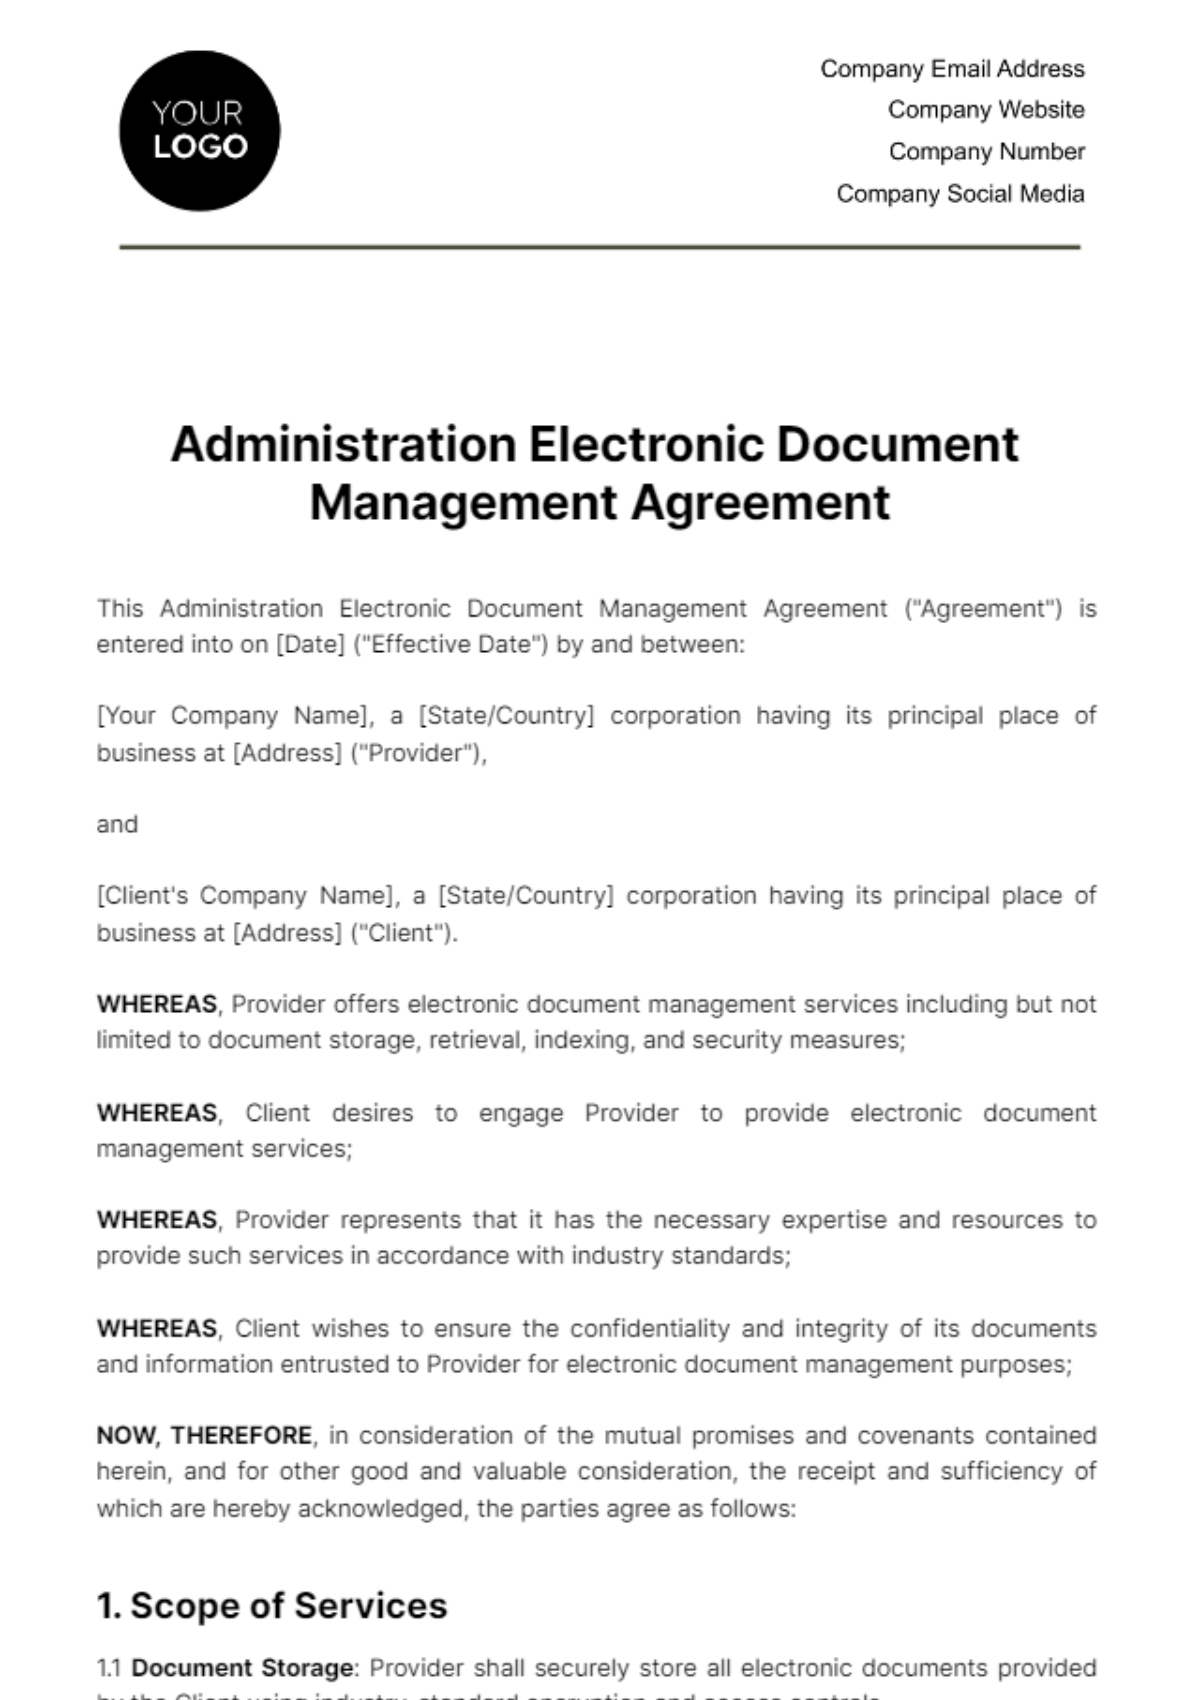 Free Administration Electronic Document Management Agreement Template